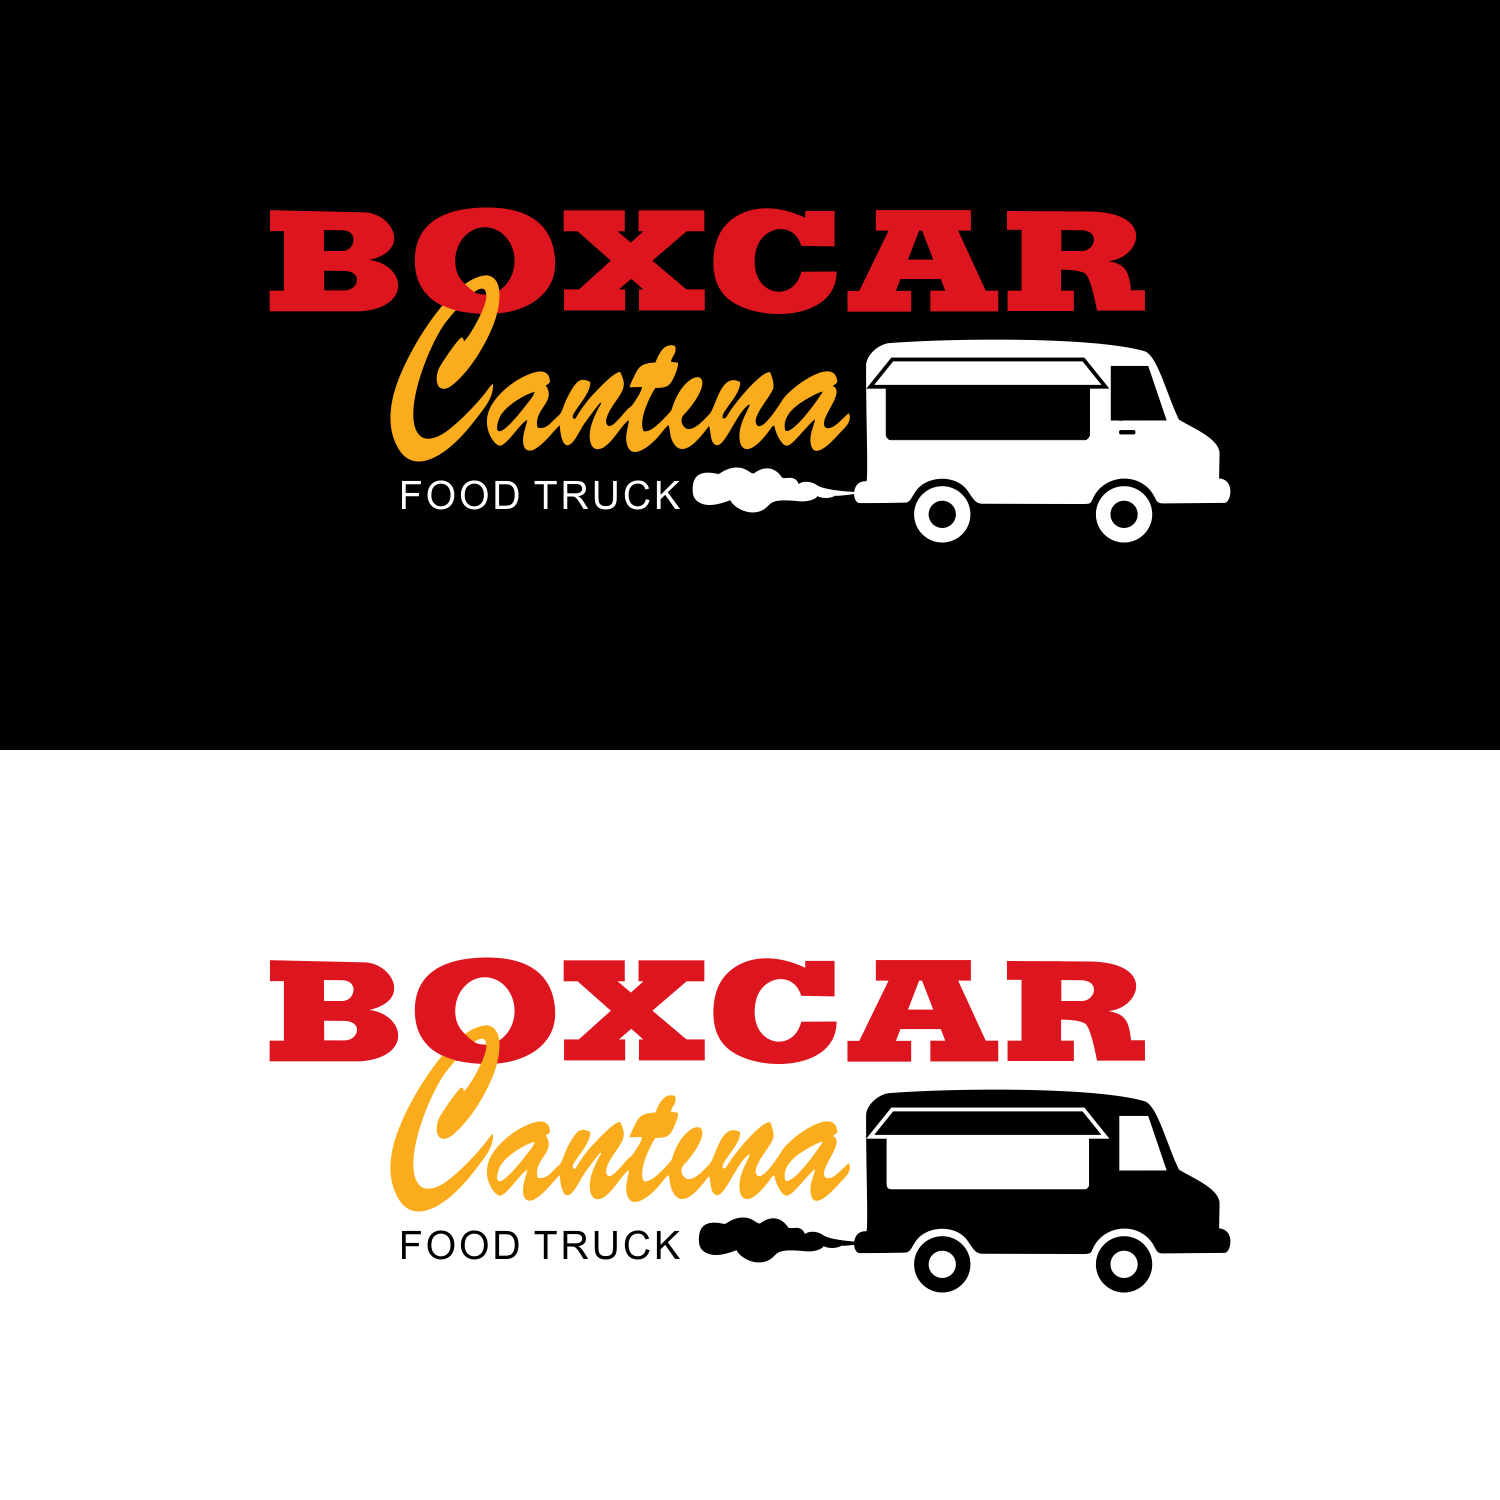 Food Truck Company Logo - Elegant, Playful Logo Design for Boxcar Cantina Food Truck by ...